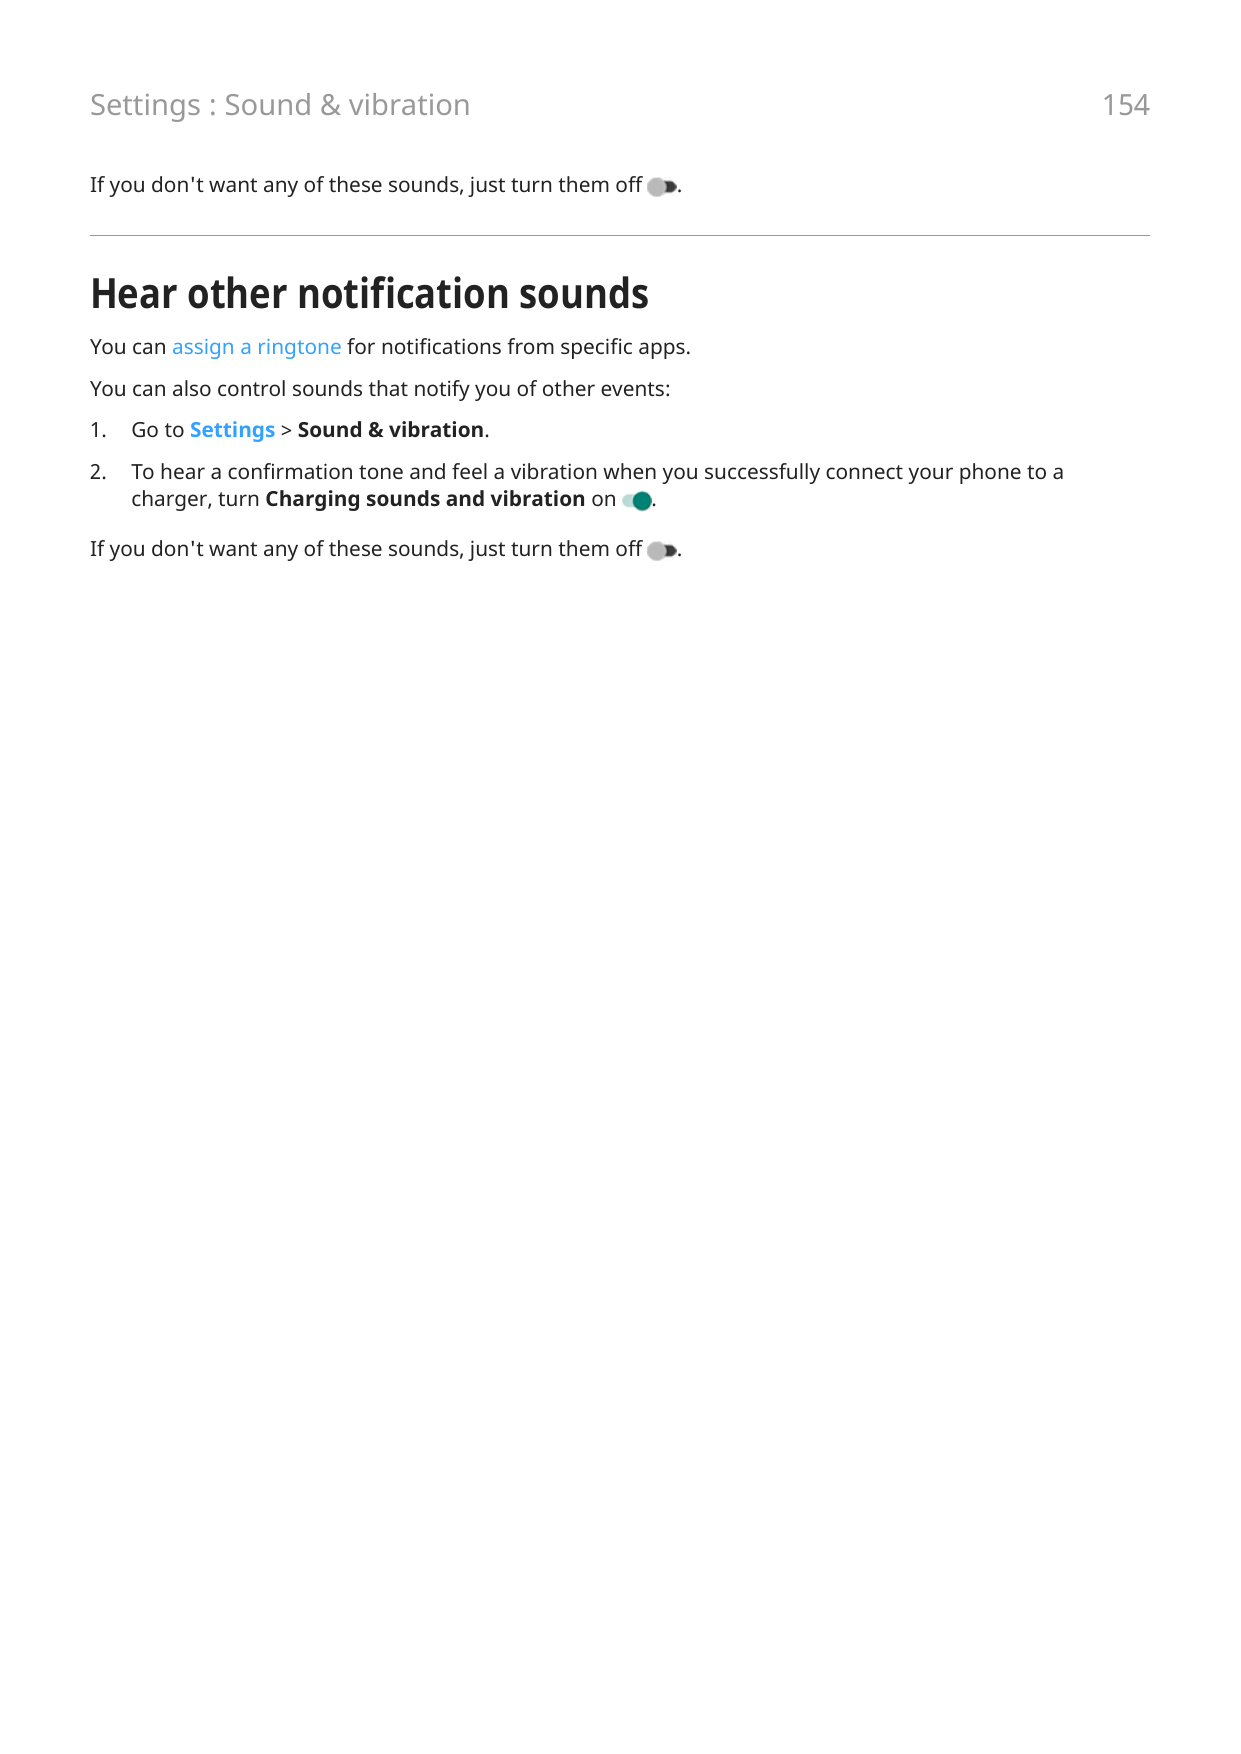 Settings : Sound & vibrationIf you don't want any of these sounds, just turn them off154.Hear other notification soundsYou can a